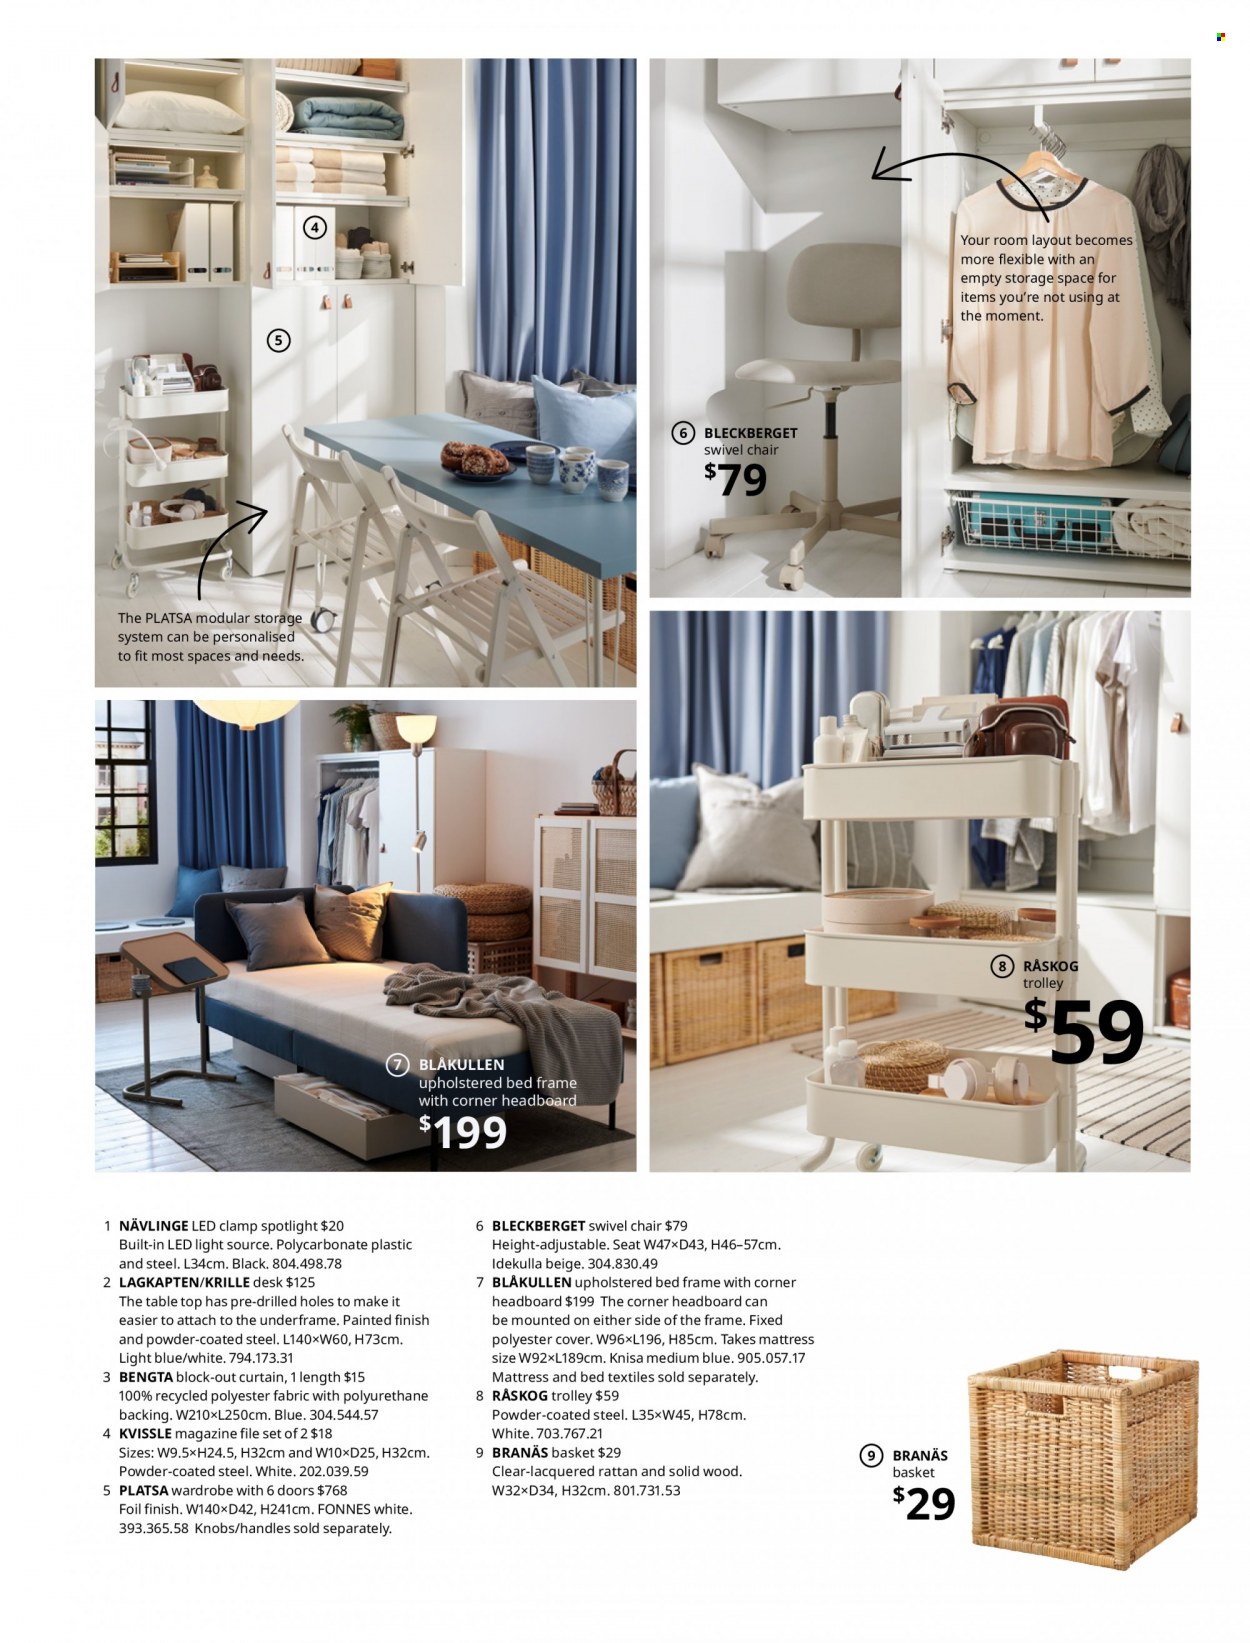 thumbnail - IKEA Catalogue - Sales products - trolley, dining table, chair, swivel chair, upholstered bed, bed, headboard, bed frame, mattress, wardrobe, desk, basket, spotlight, curtain. Page 11.